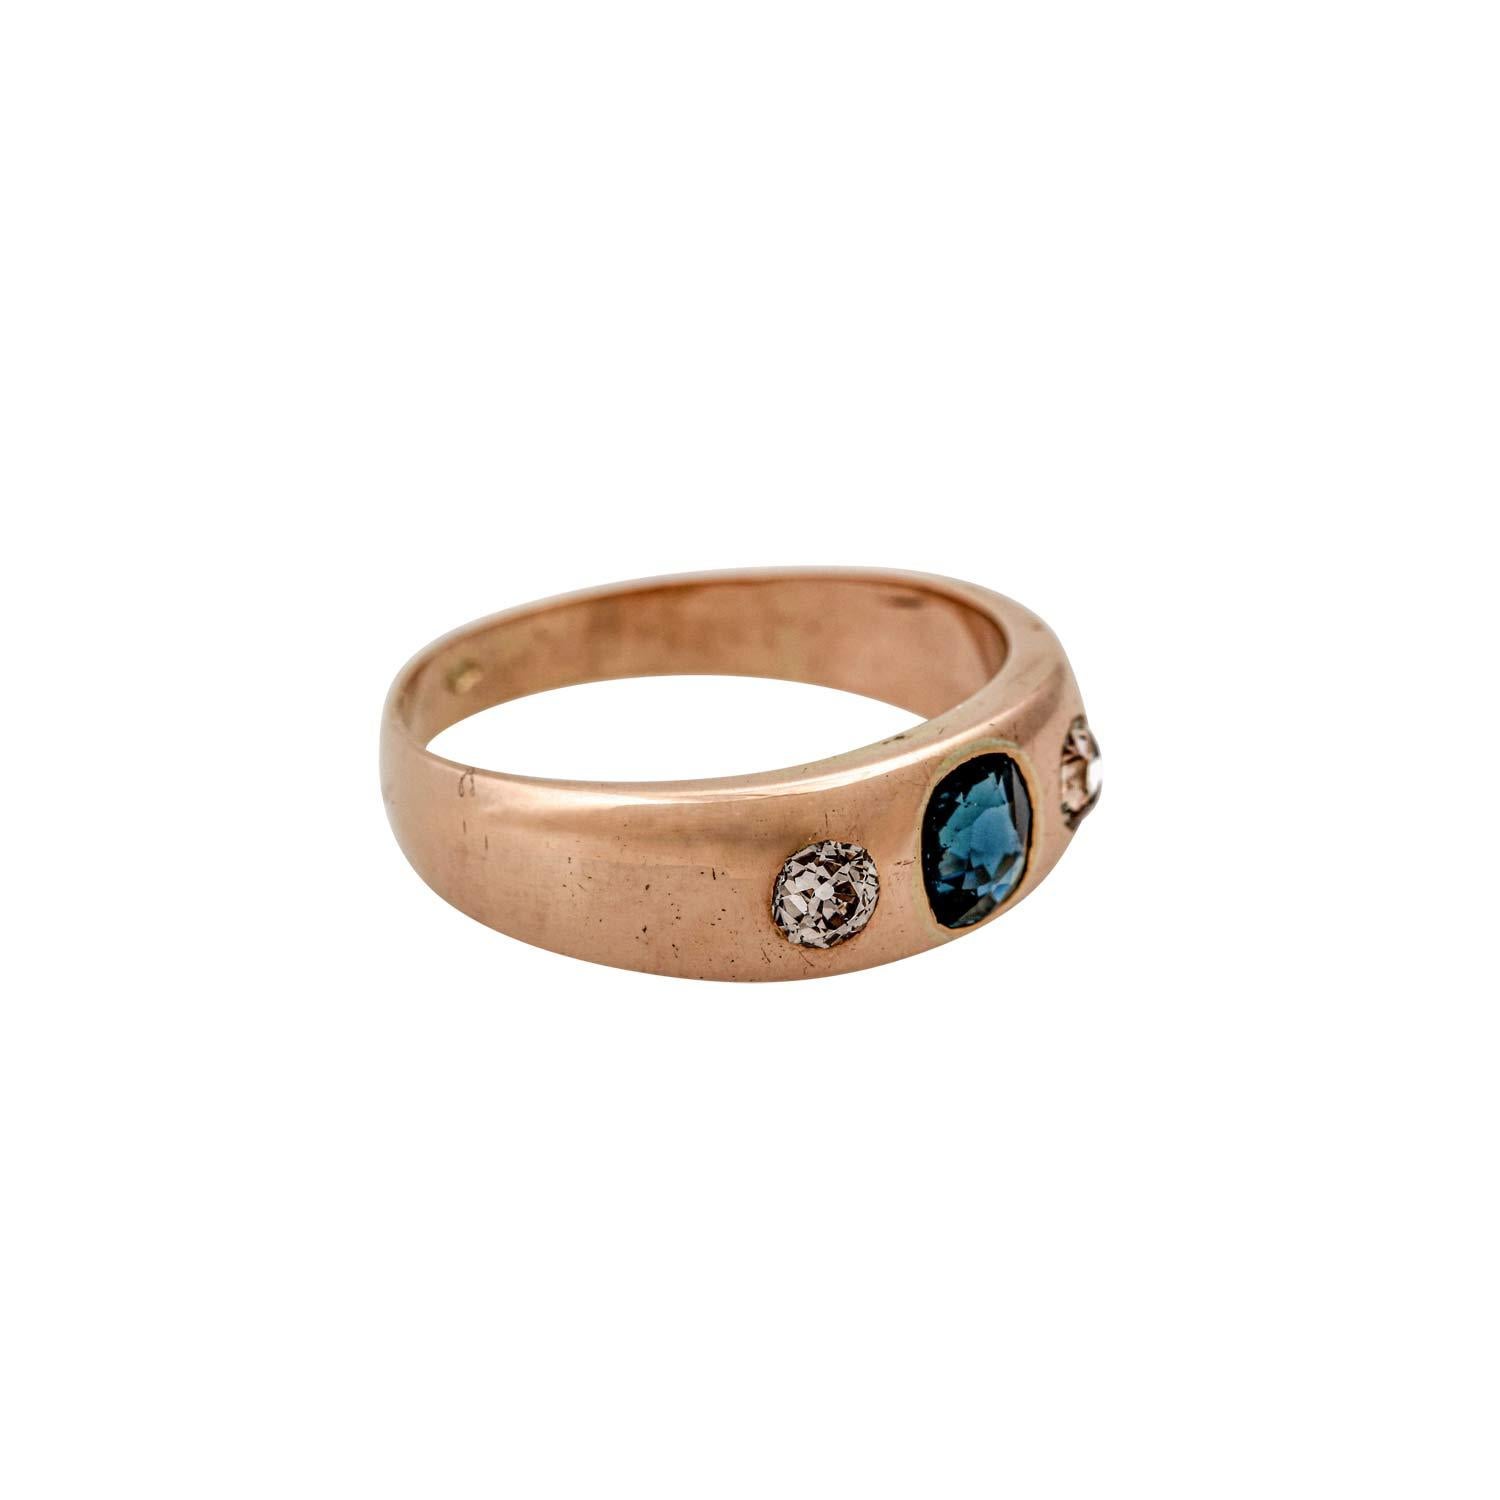 Band ring with an oval faceted sapphire and 2 old European cut diamonds, total approx. 0.3 ct, medium low quality, 14K rose gold, RW: 56, Austria around 1900, signs of wear, sapphire and 1 diamond chipped and scratched.